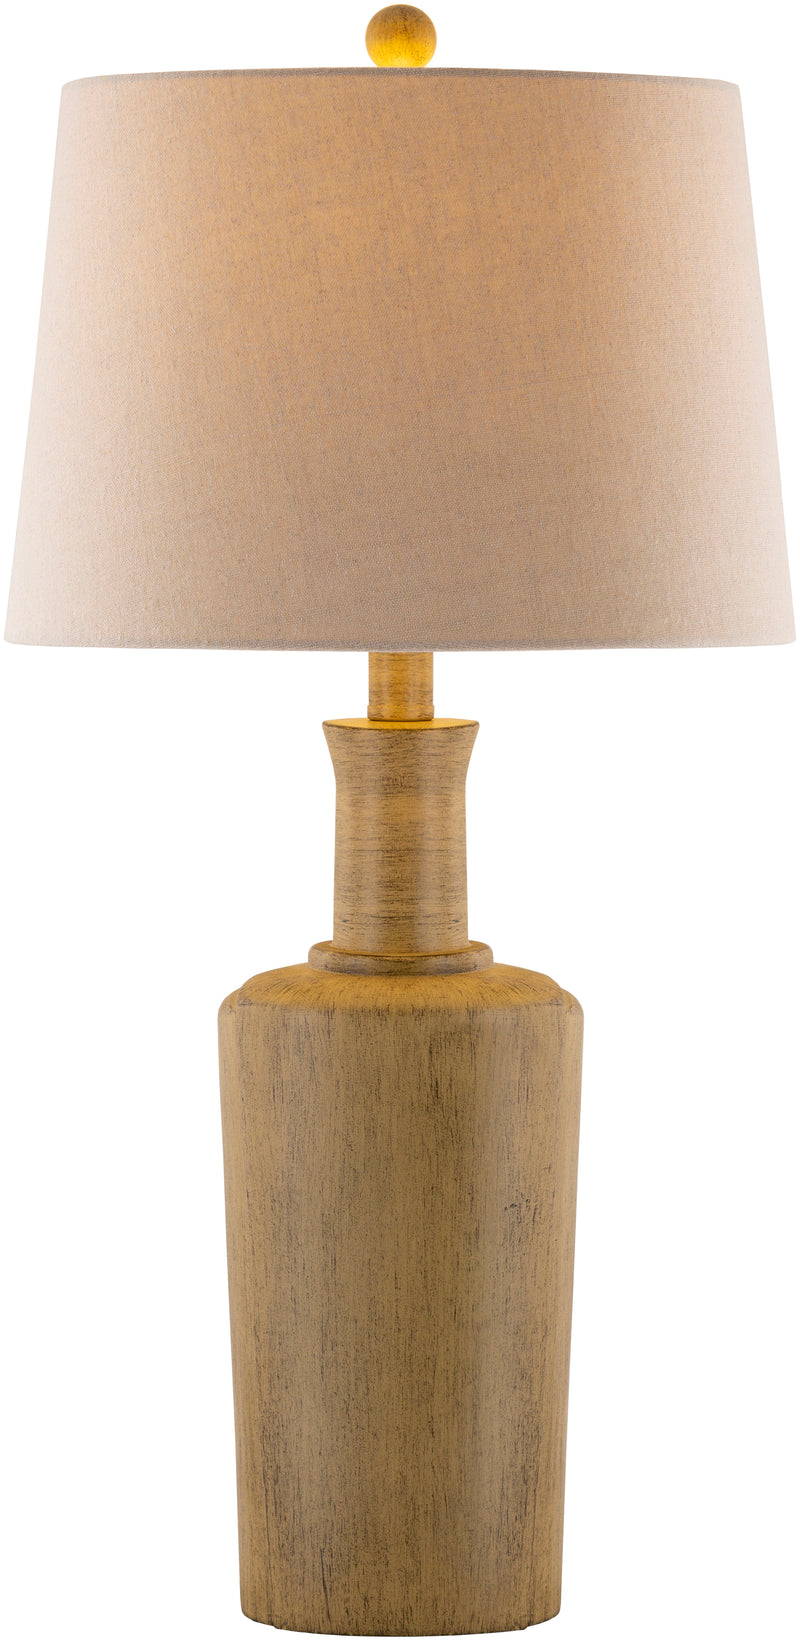 media image for Capitan CPI-001 Table Lamp in Tan & Natural by Surya 239